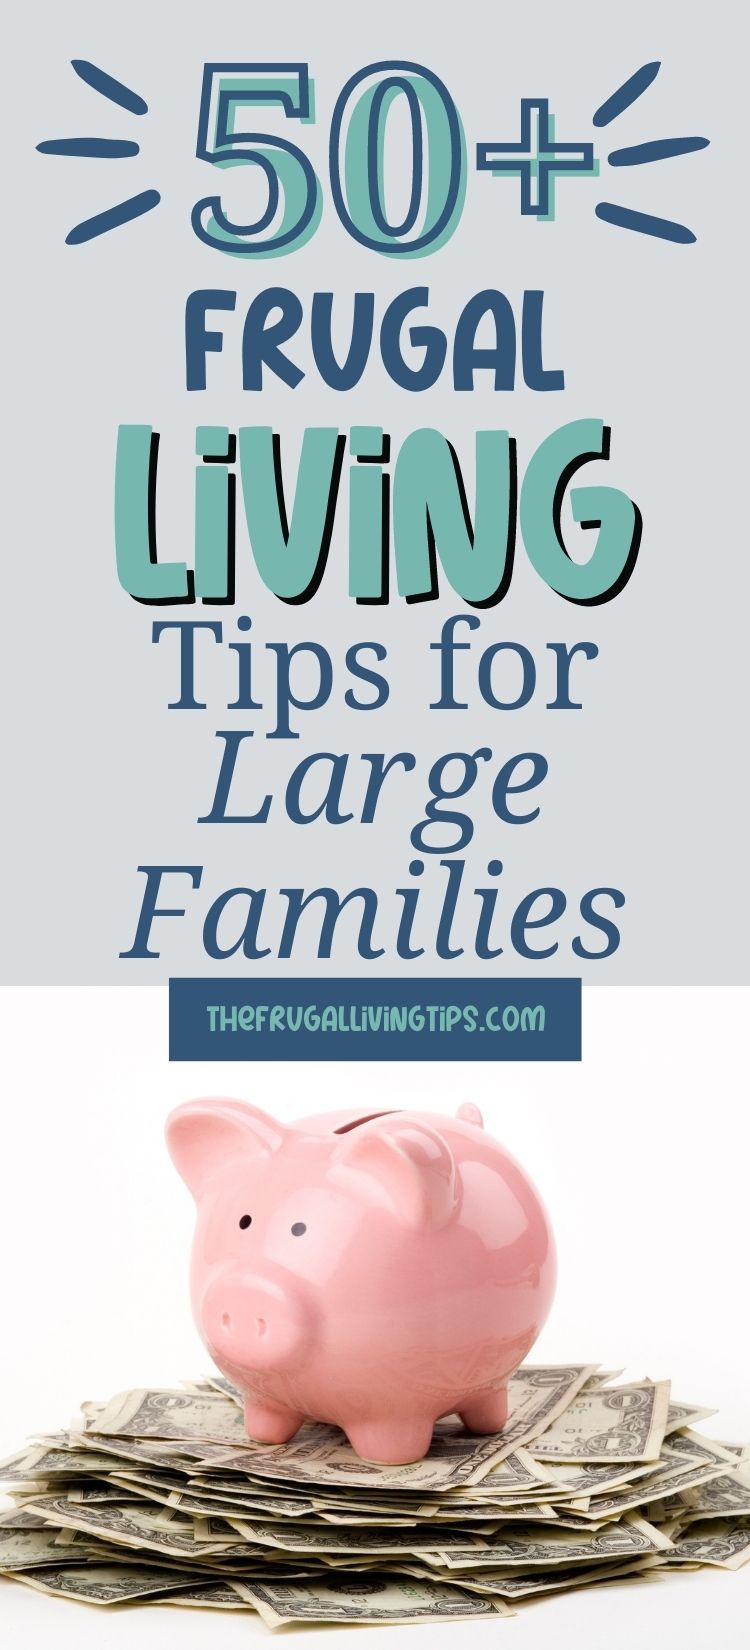 https://www.thefrugalnavywife.com/wp-content/uploads/2016/02/50-Frugal-Living-Tips-for-Large-Families-Pin.jpg